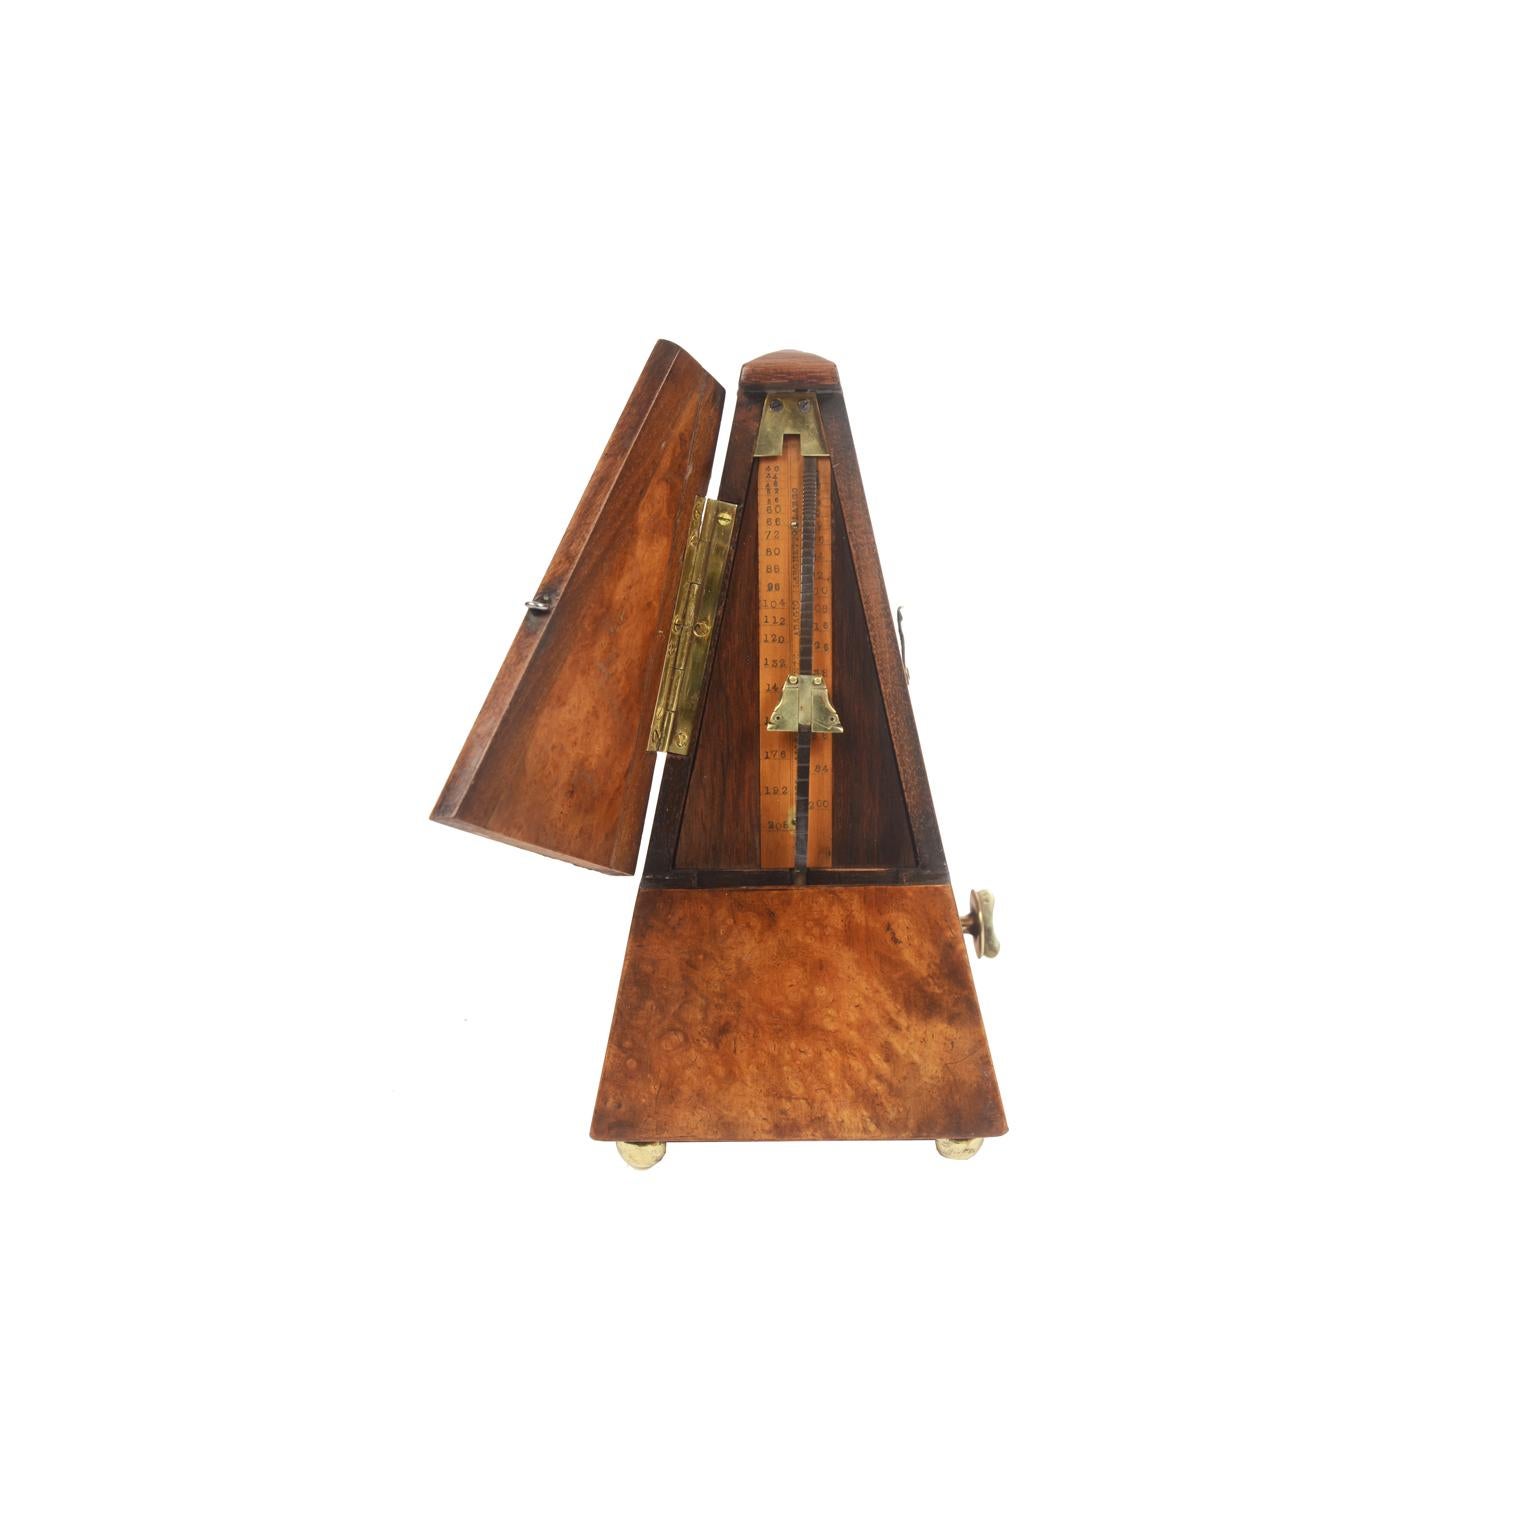 Metronome made in the late 19th century. It is an instrument used to measure the Tempo of music, the sound of the pendulum indicates the exact speed of execution. The instrument consists of a pendulum with a counterweight that works with a clockwork